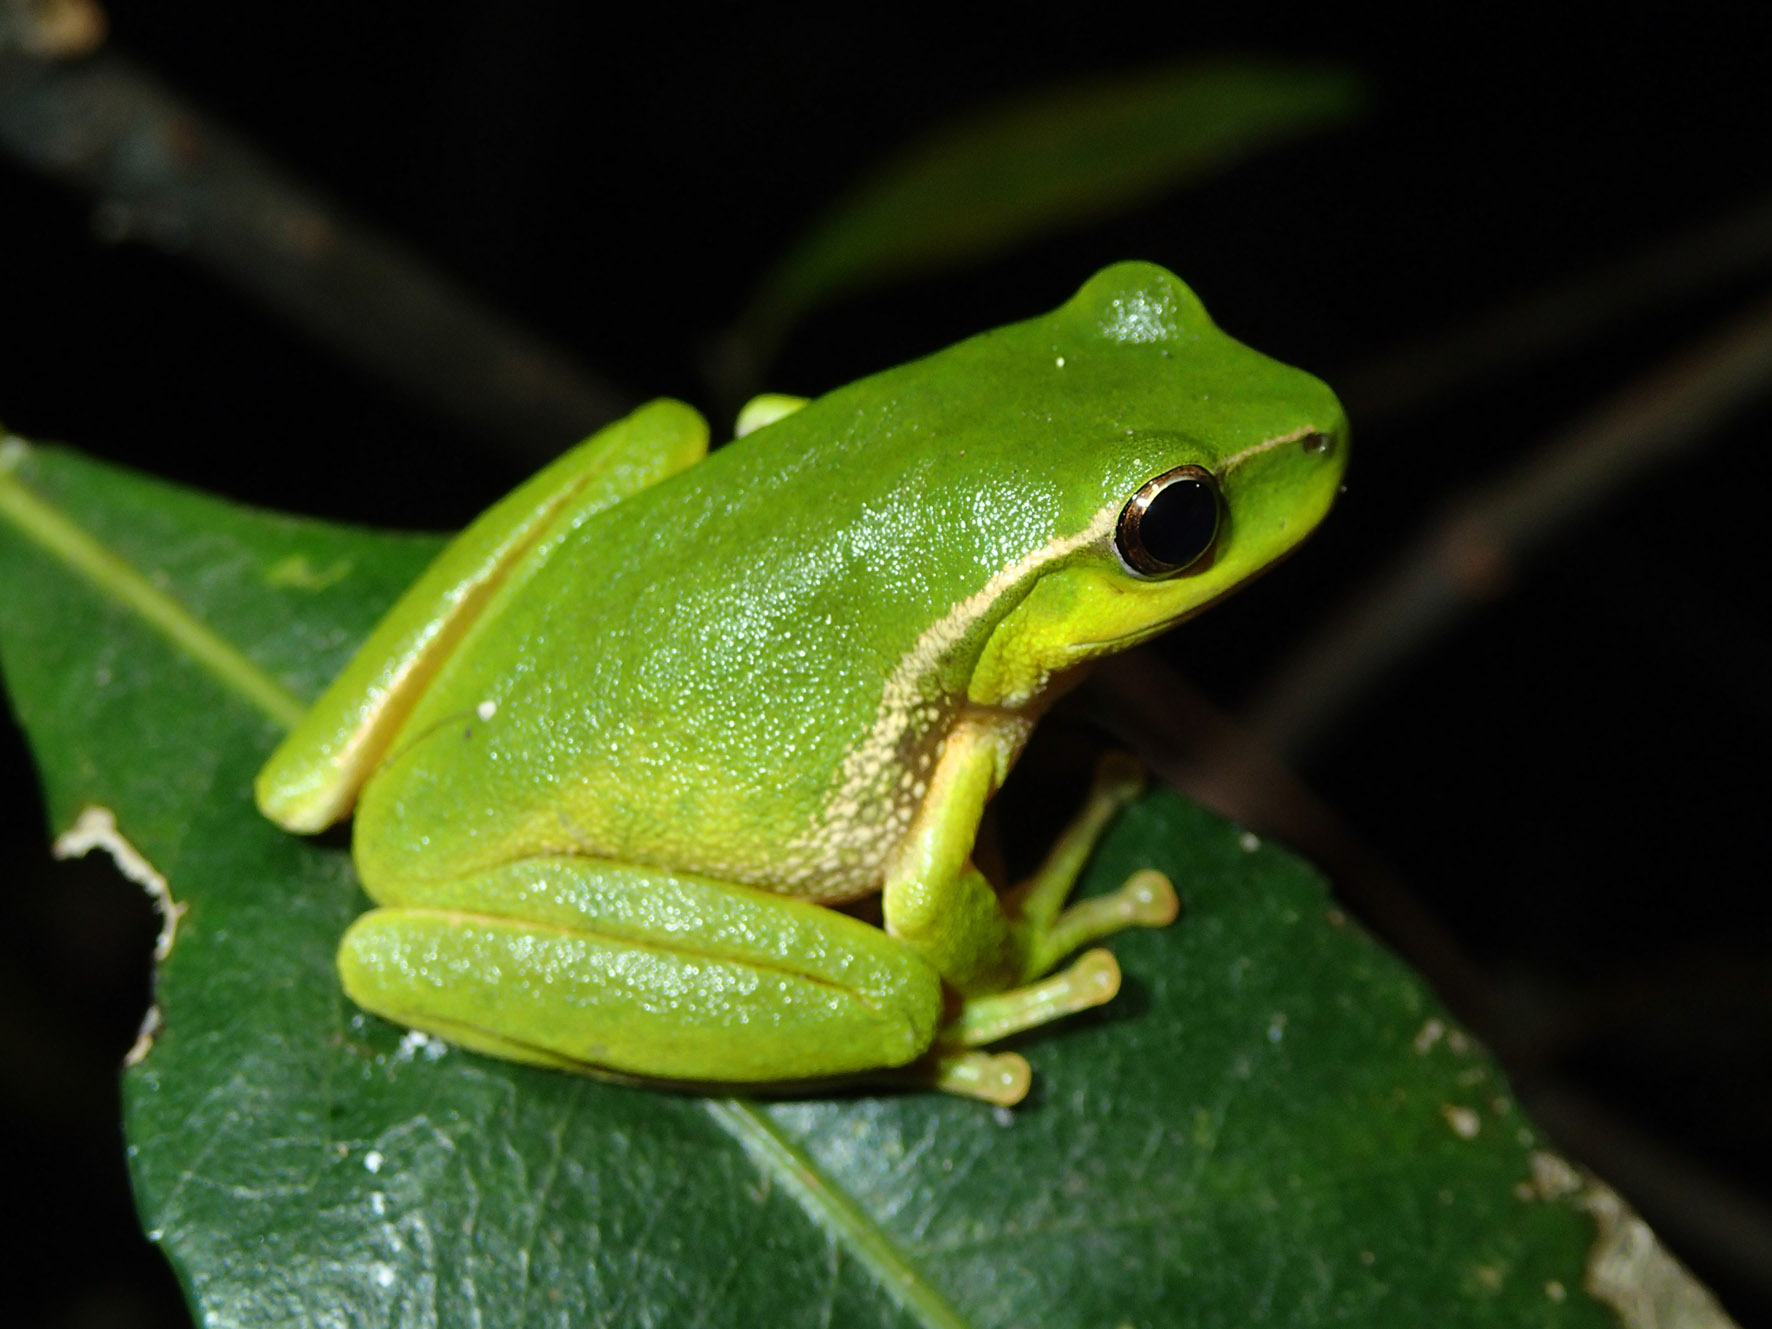 Science Snapshot: Small Frogs Can't Jump (Gracefully)